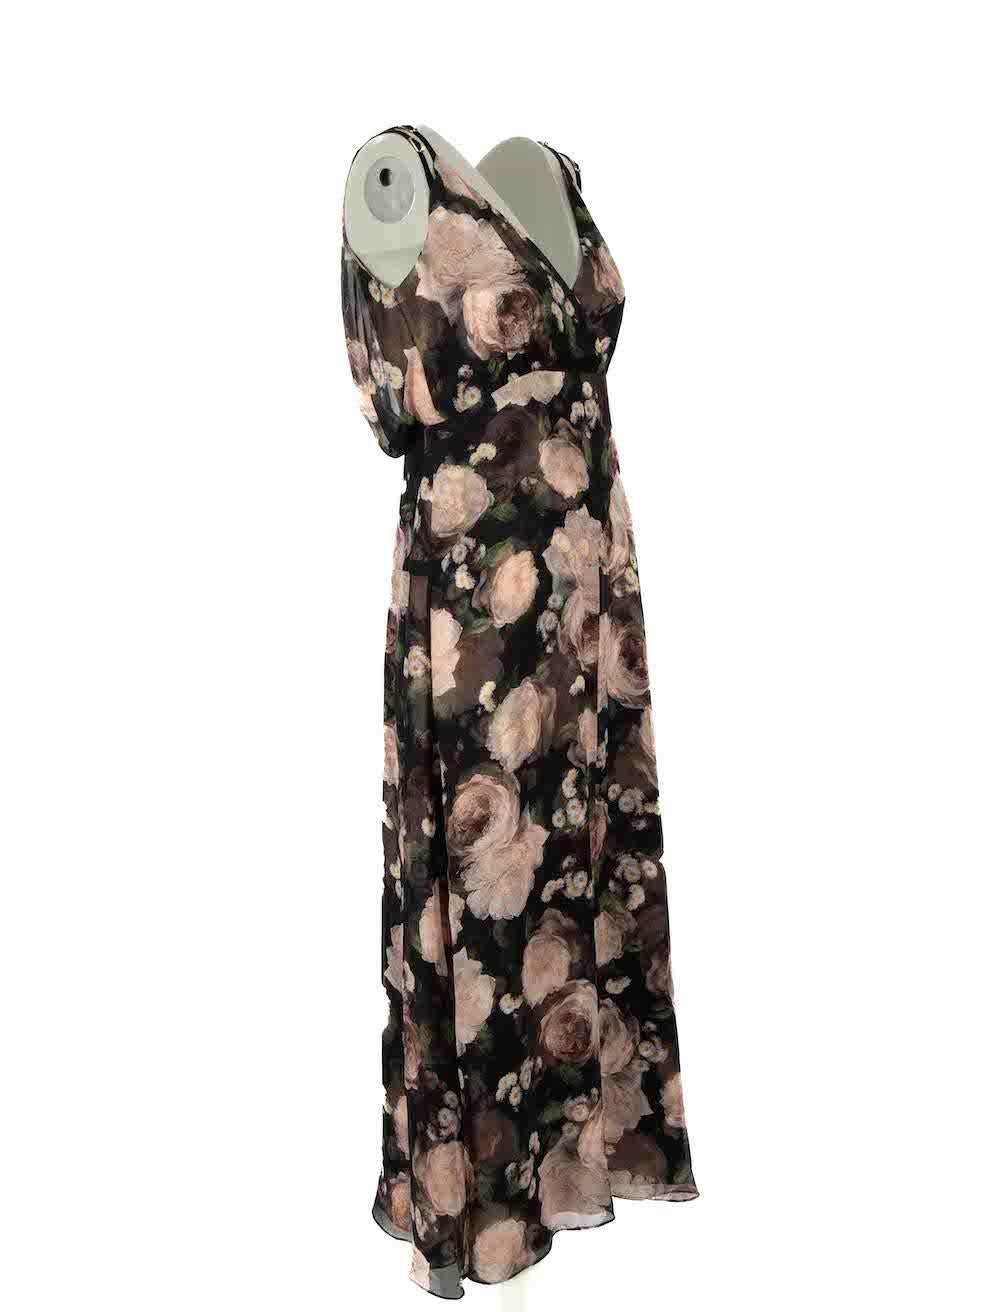 CONDITION is Very good. Hardly any visible wear to dress is evident on this used Erdem designer resale item.

Details
Orabella
Black
Silk
Dress
Floral pattern
Sleeveless
Adjustable shoulder straps
V-neck
Midi
Back zip and hook fastening

Made in